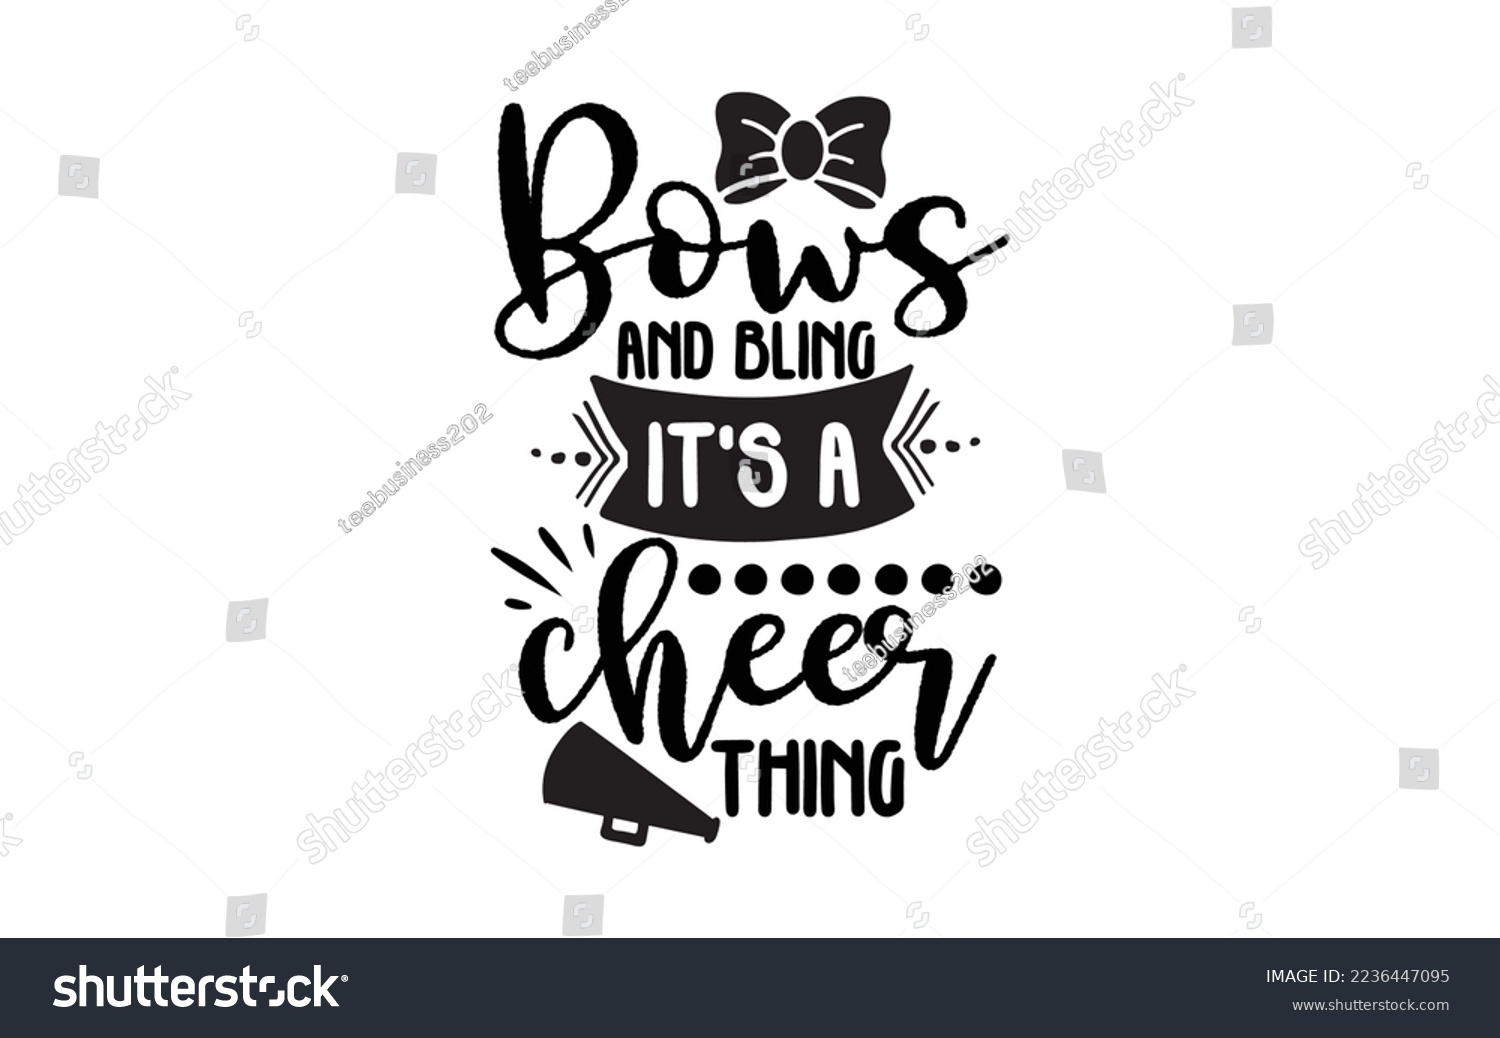 SVG of Bows and bling, it's a cheer thing t-shirt design man and women vector file svg